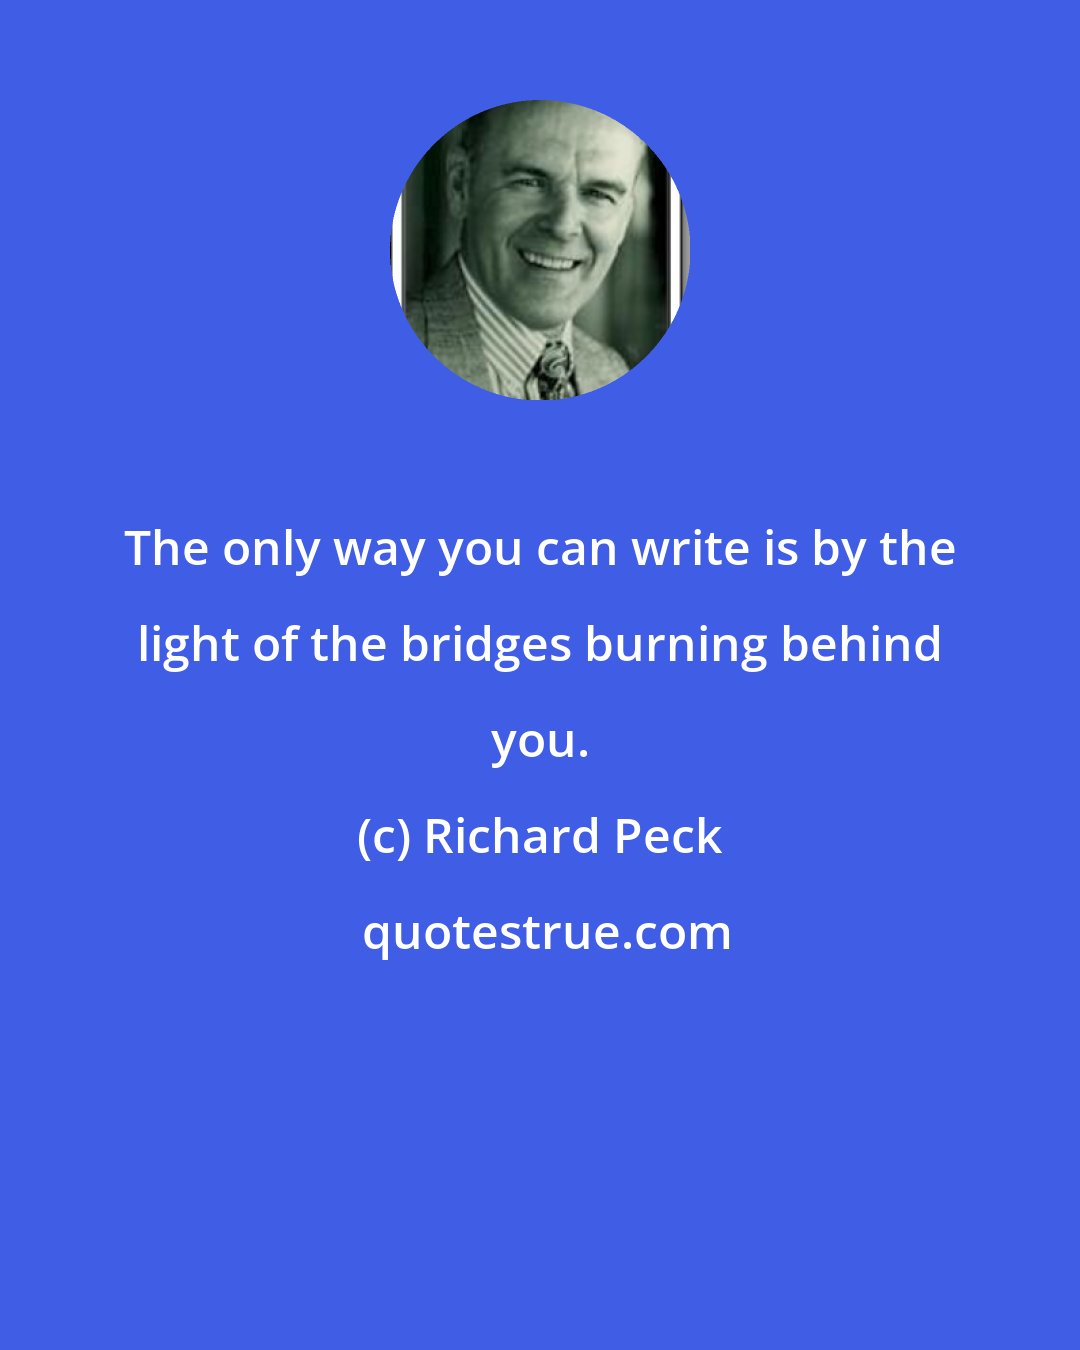 Richard Peck: The only way you can write is by the light of the bridges burning behind you.